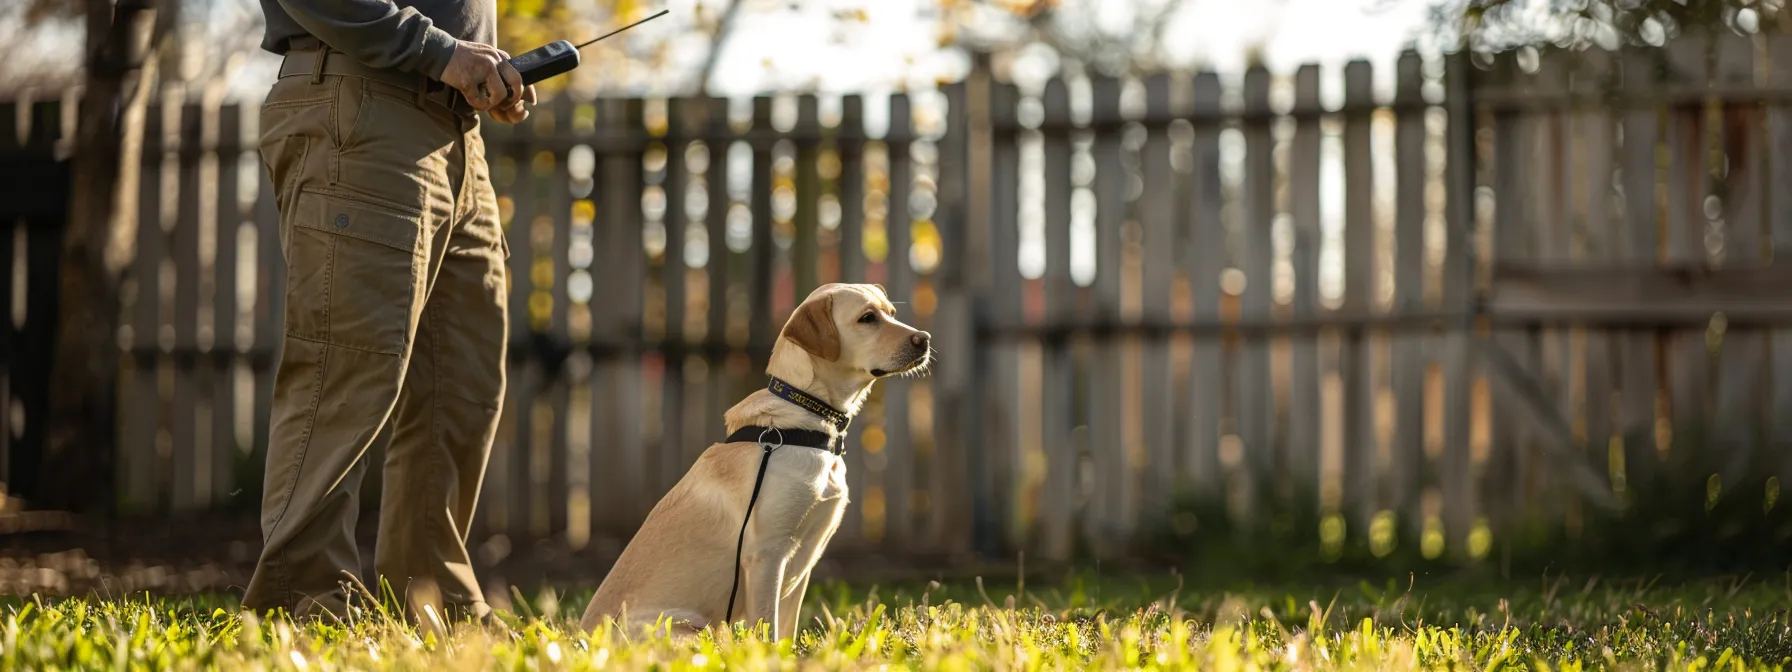 a labrador retriever wearing a shock collar within a fenced yard, with an owner holding a remote control device.